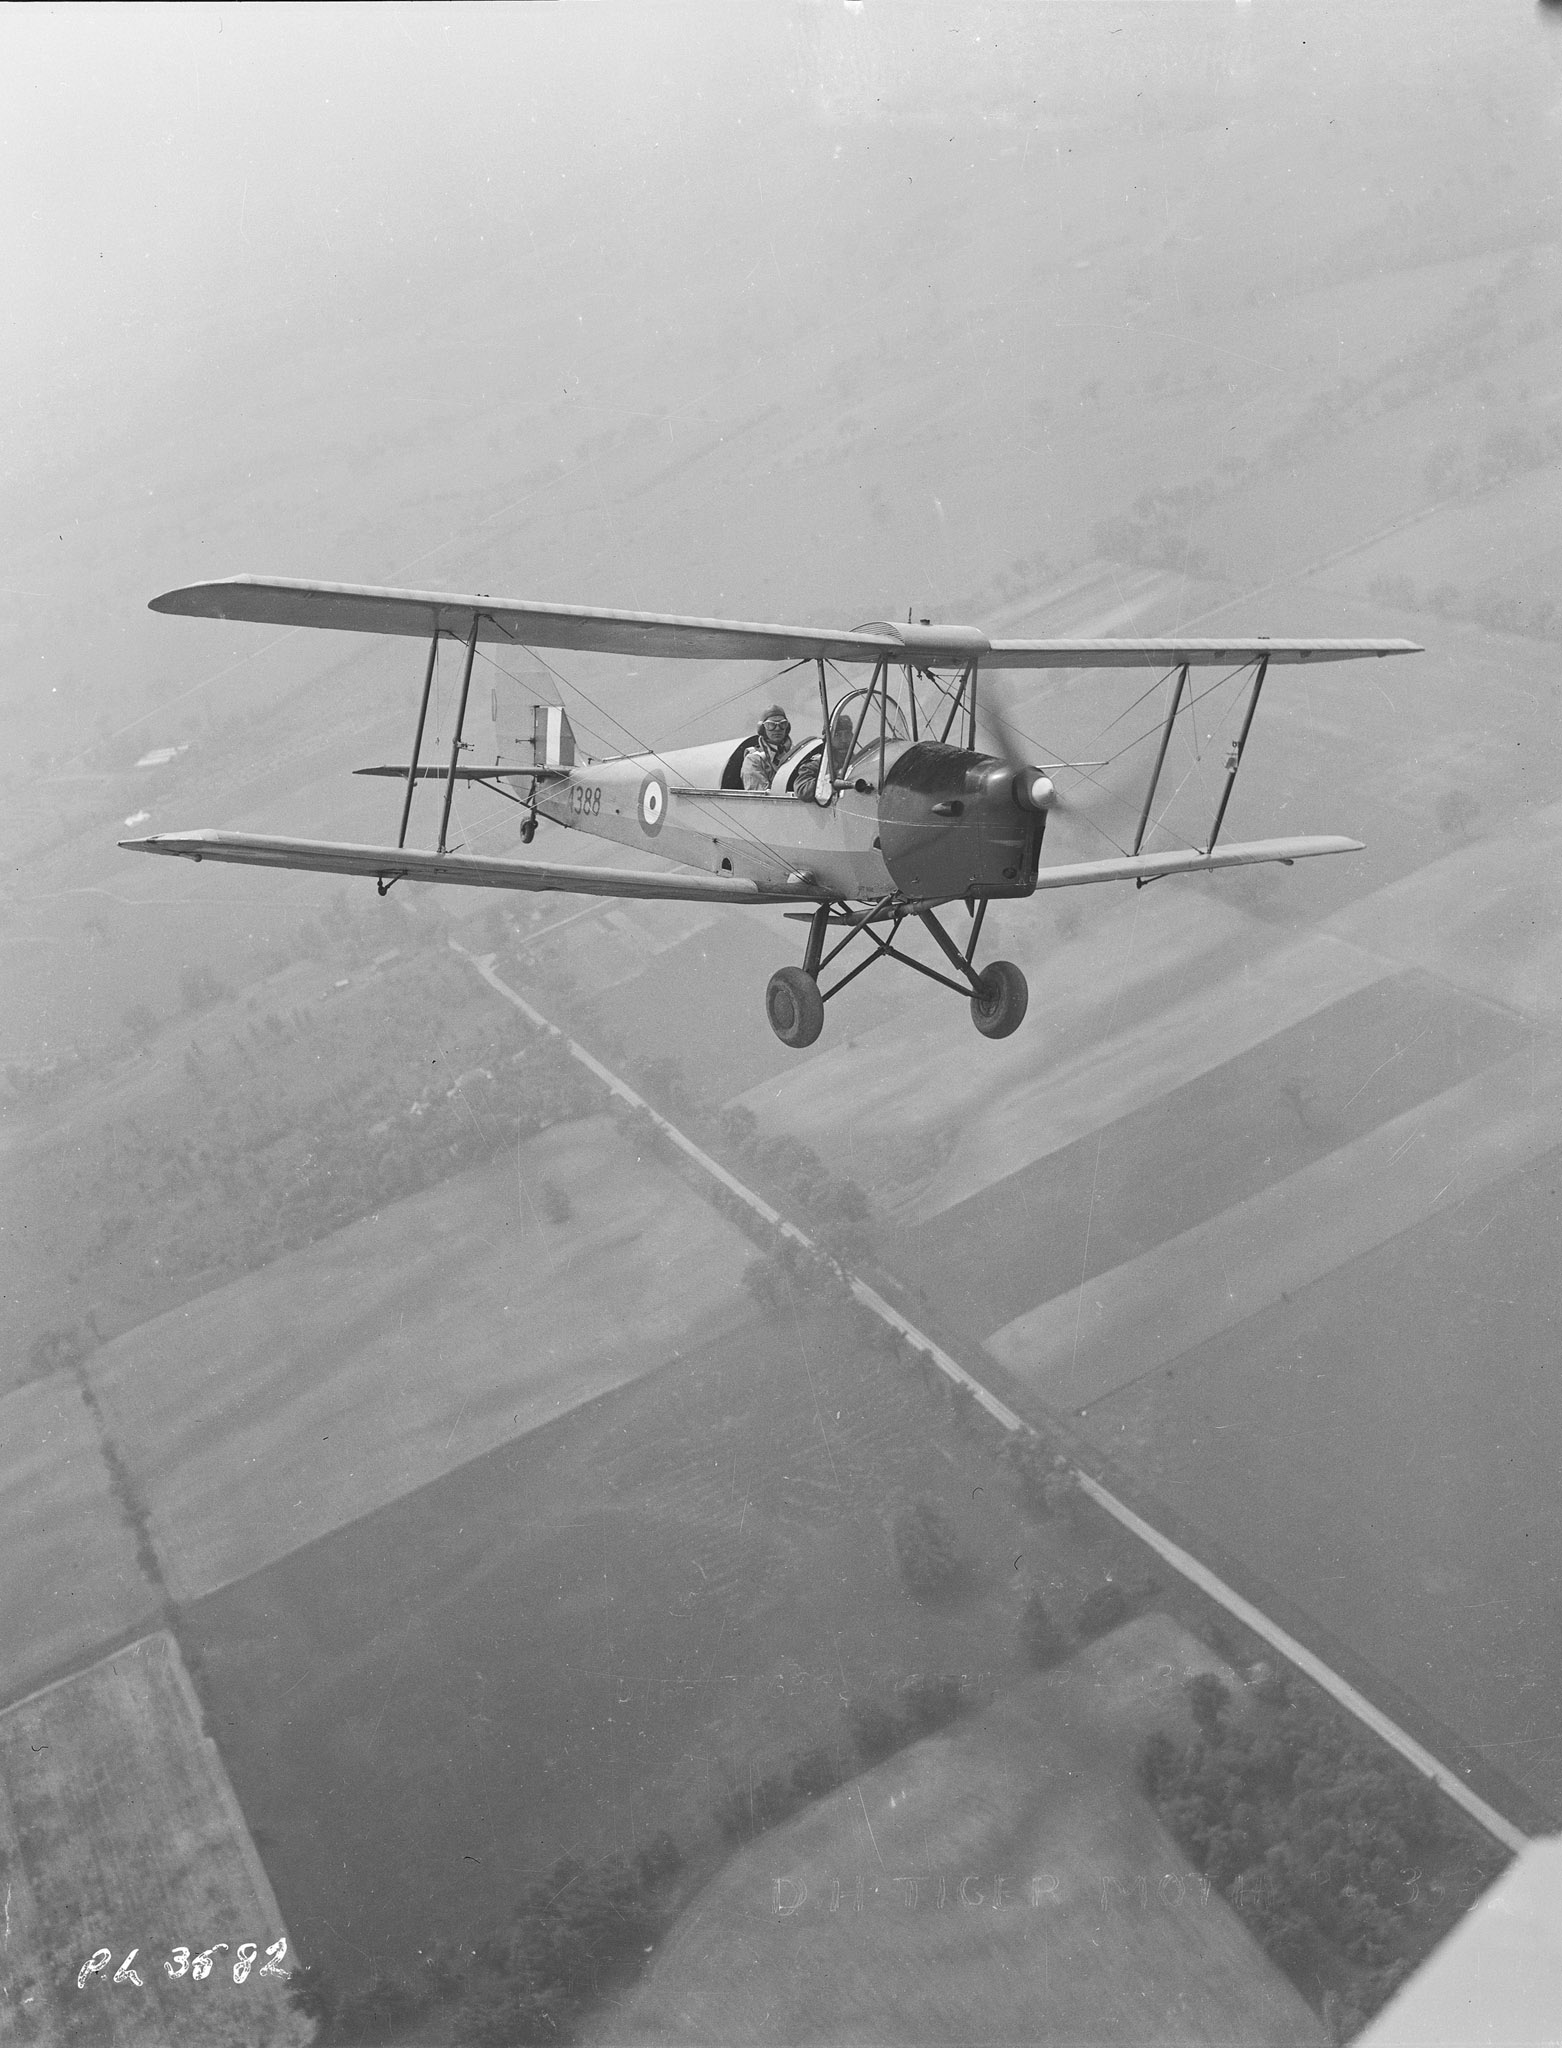 A Tiger Moth flies out of No. 1 Elementary Flight Training School at RCAF Malton, Ontario. Almost all of the pilots under the British Commonwealth Air Training Plan in Canada began their flight training on Tiger Moths. PHOTO: DND Archives, PL-3582